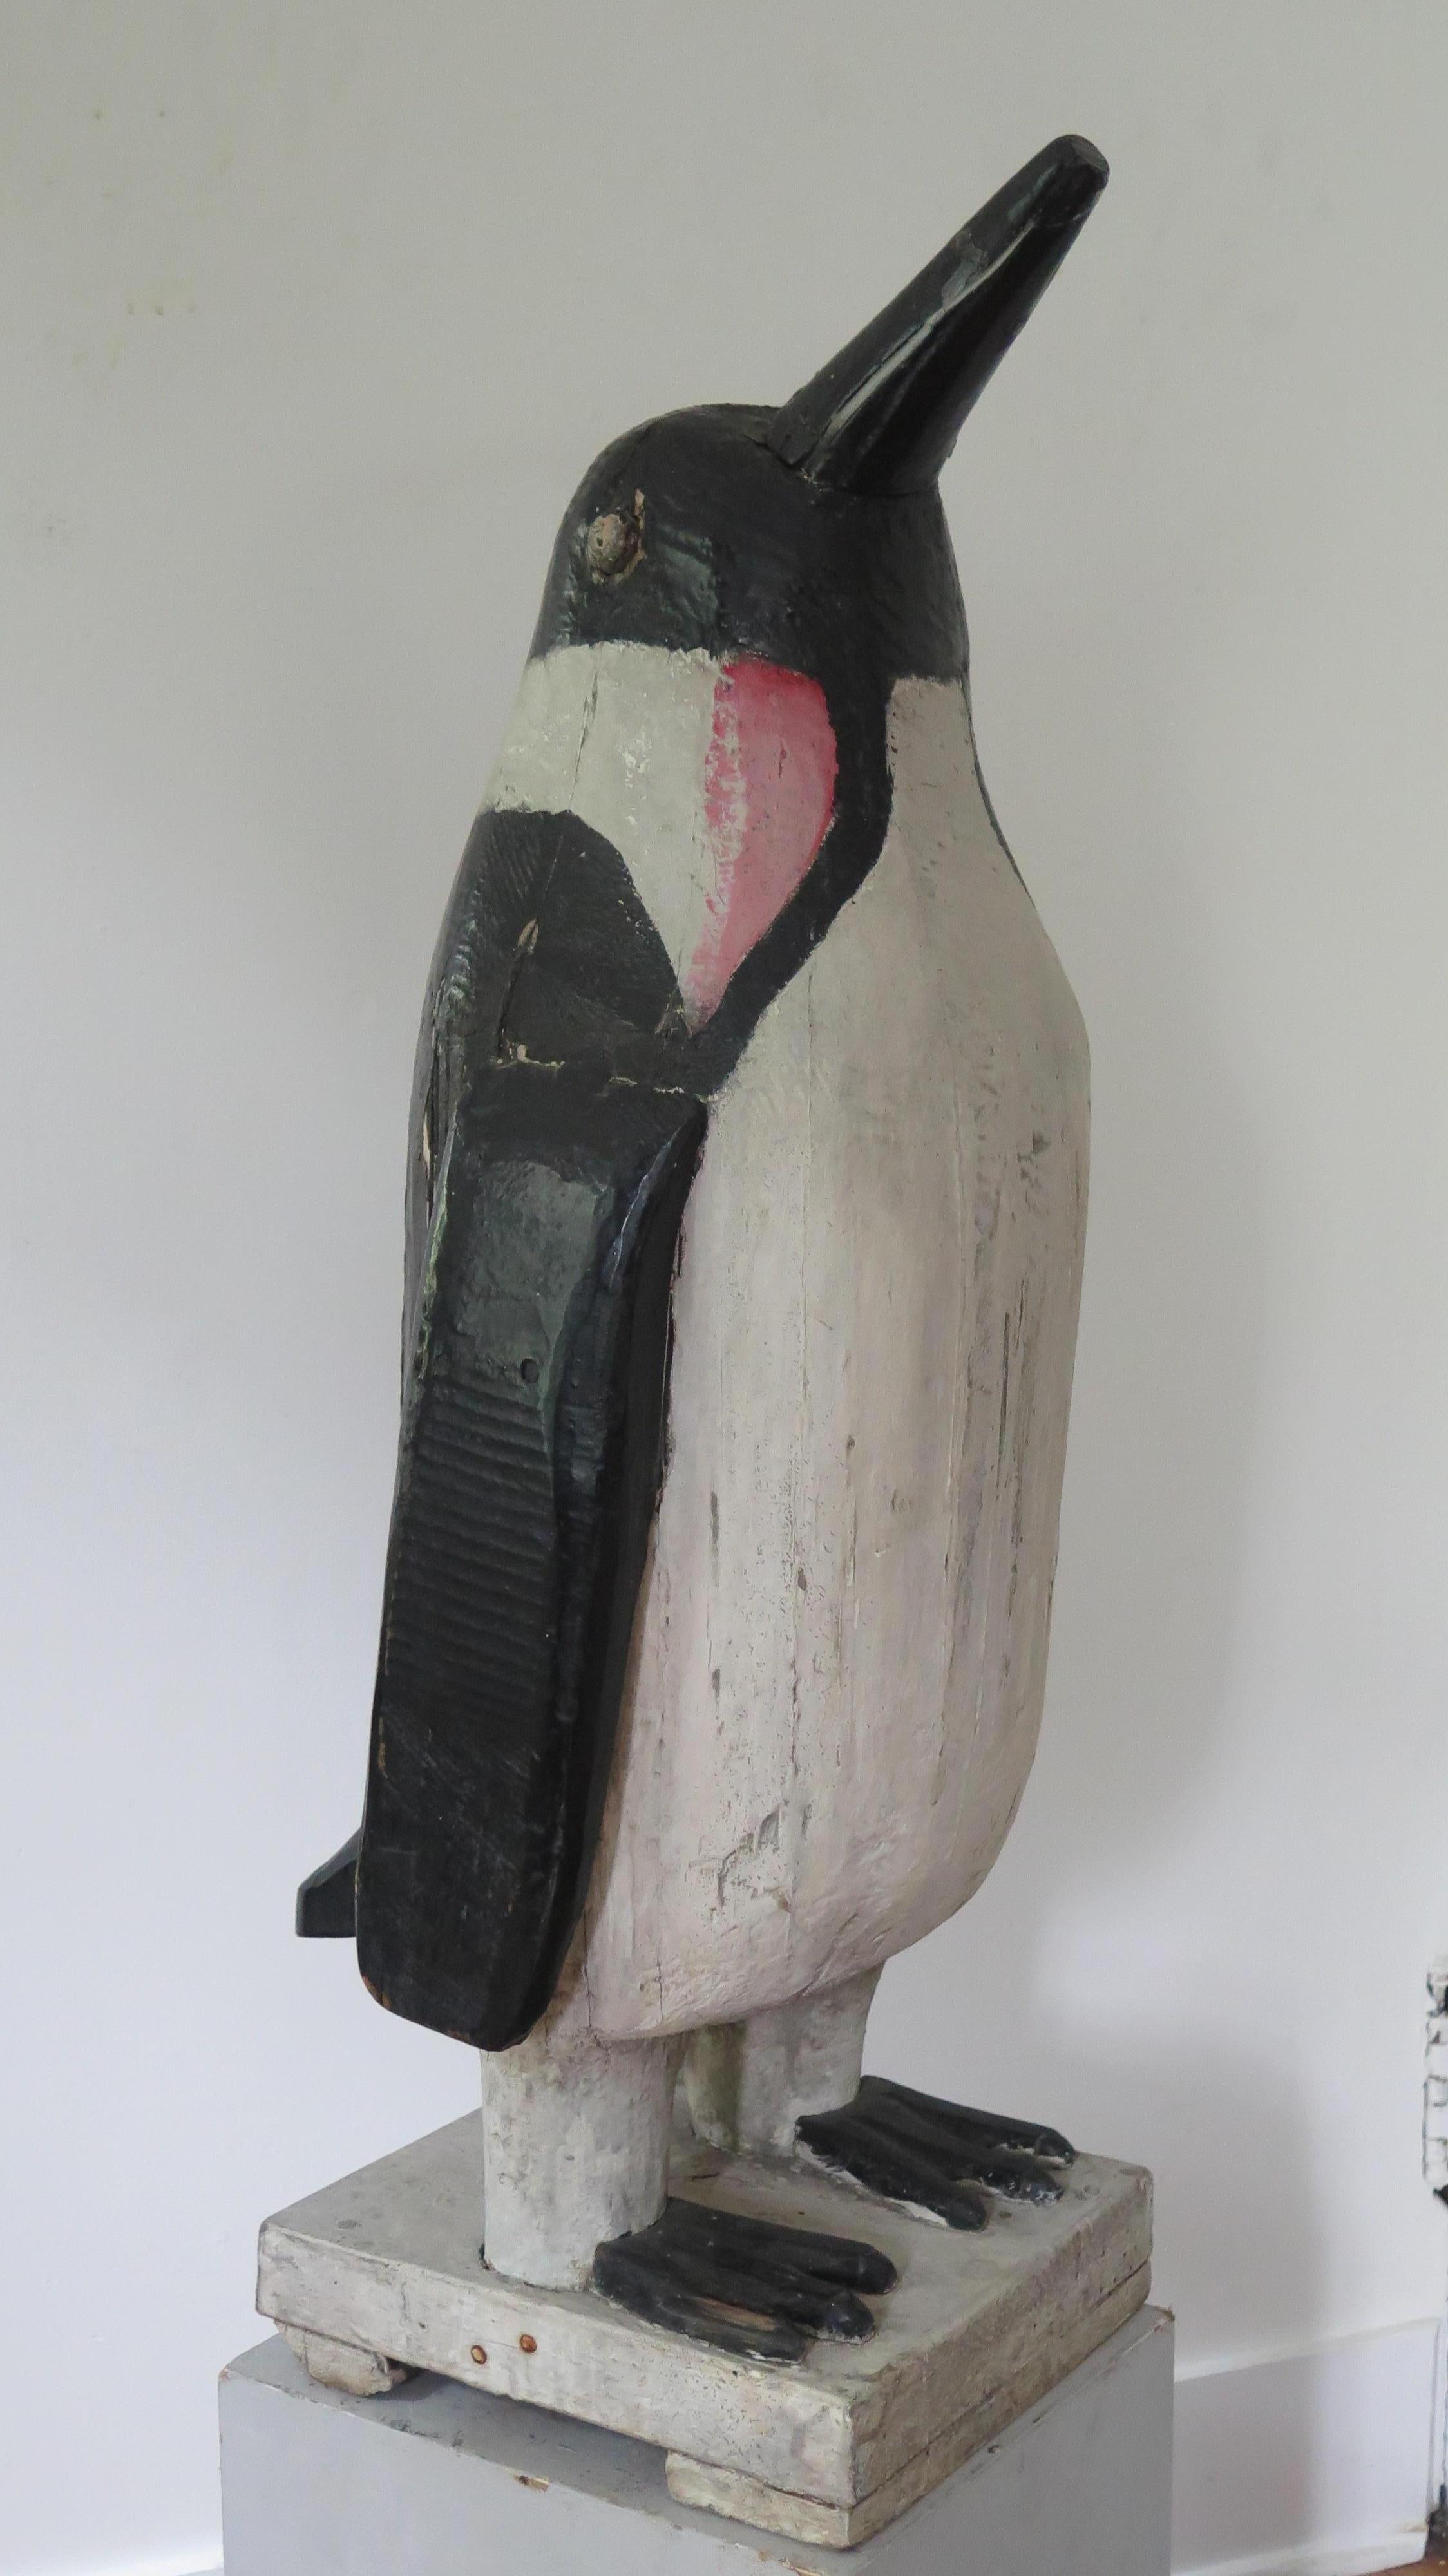 Charles Hart (1862-1960) was a stone contractor and mason in Glouchester, Massachusetts who became known as a carver of fine duck decoys. Hart also had a passion for penguins which he carved in different sizes. This is one of his larger penguin